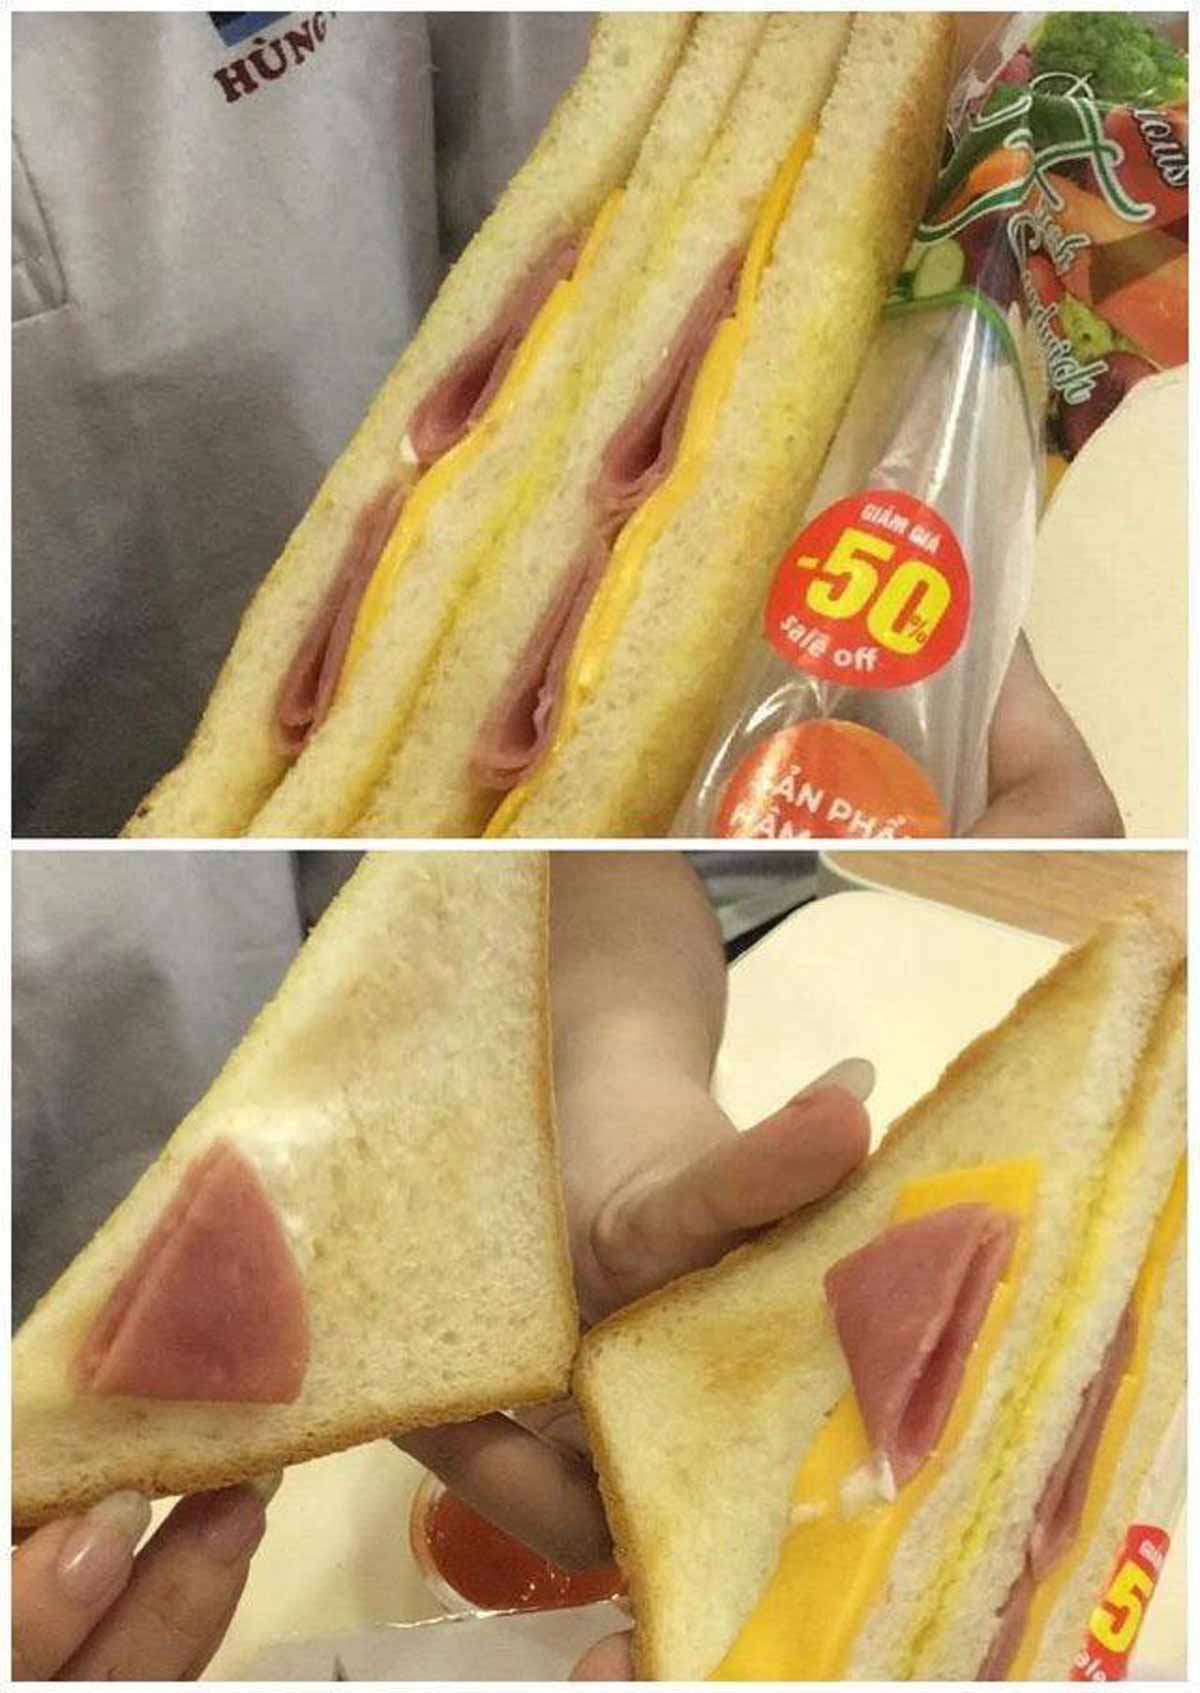 Funny and frustrating photo of a premade sandwich and then it open up and you can see there's nothing in it